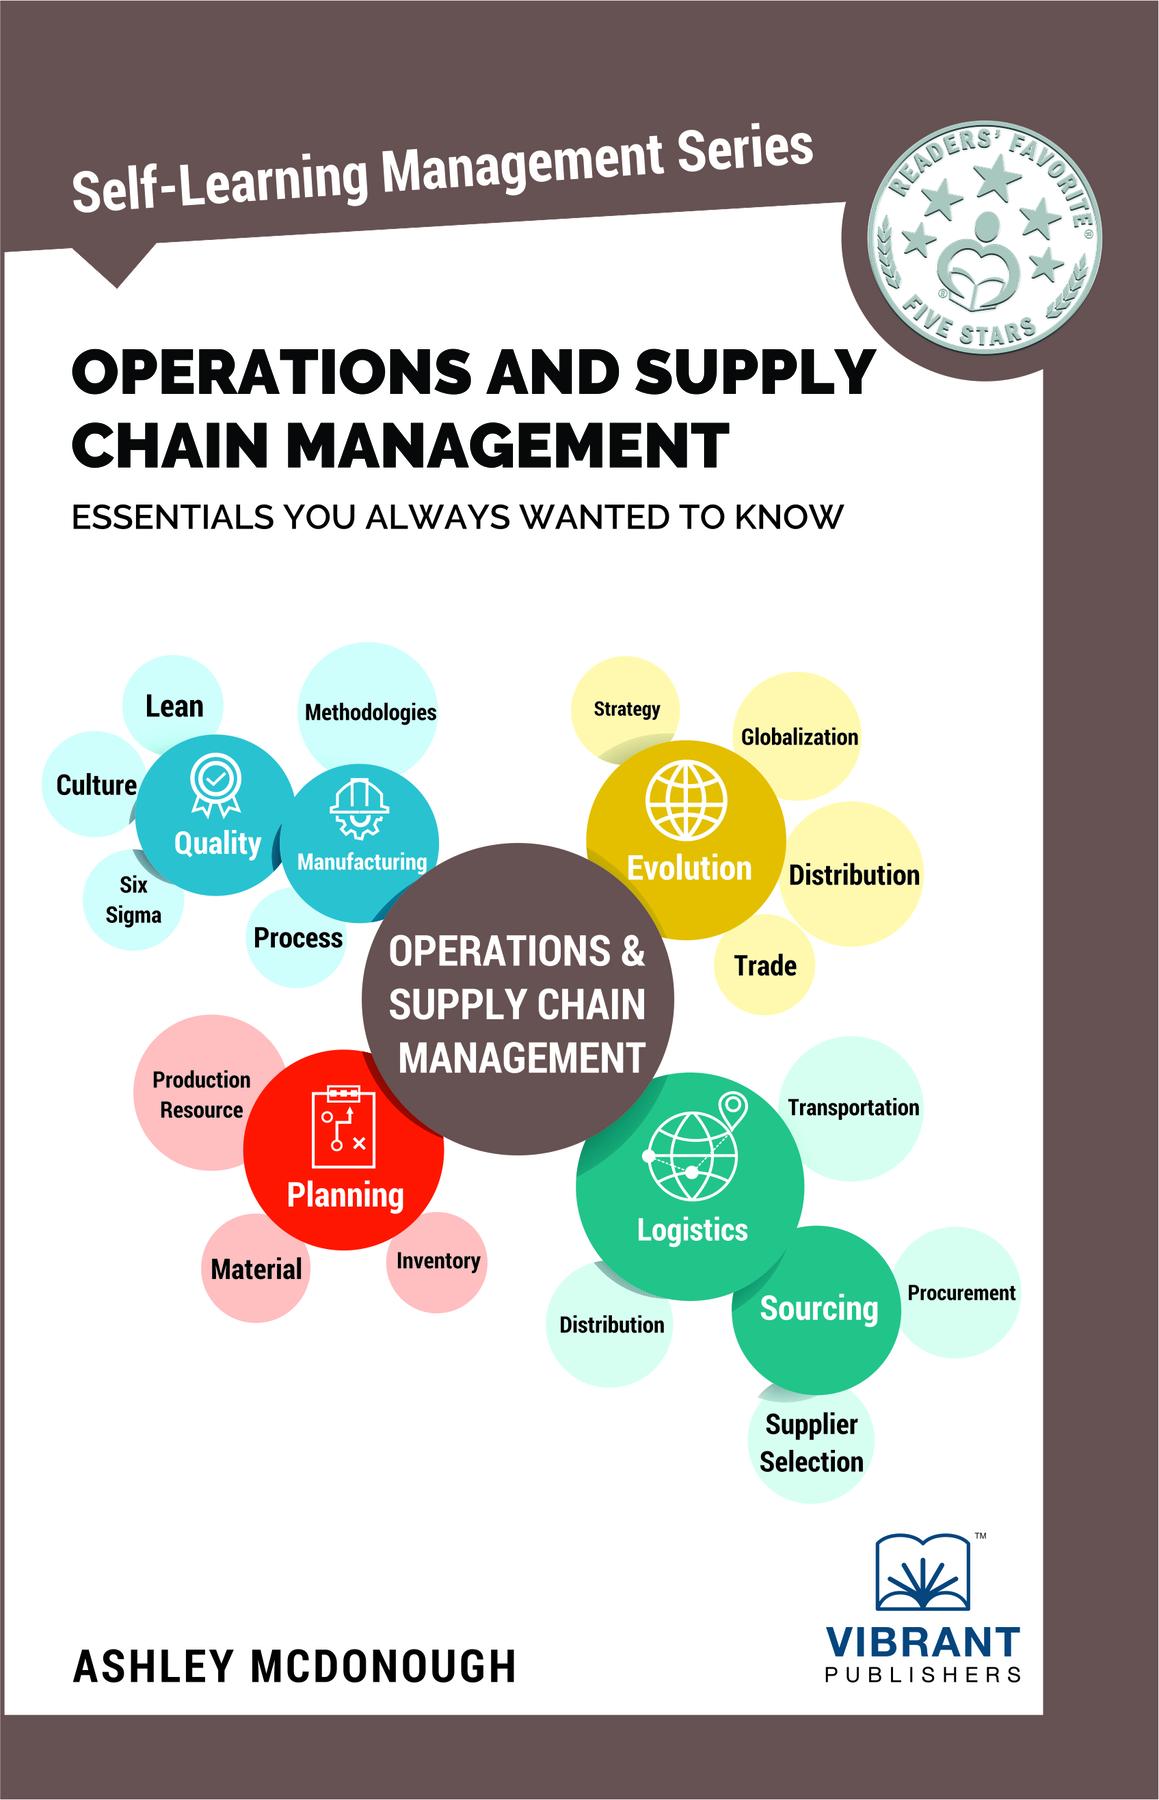 Operations and Supply Chain Management Essentials You Always Wanted to Know